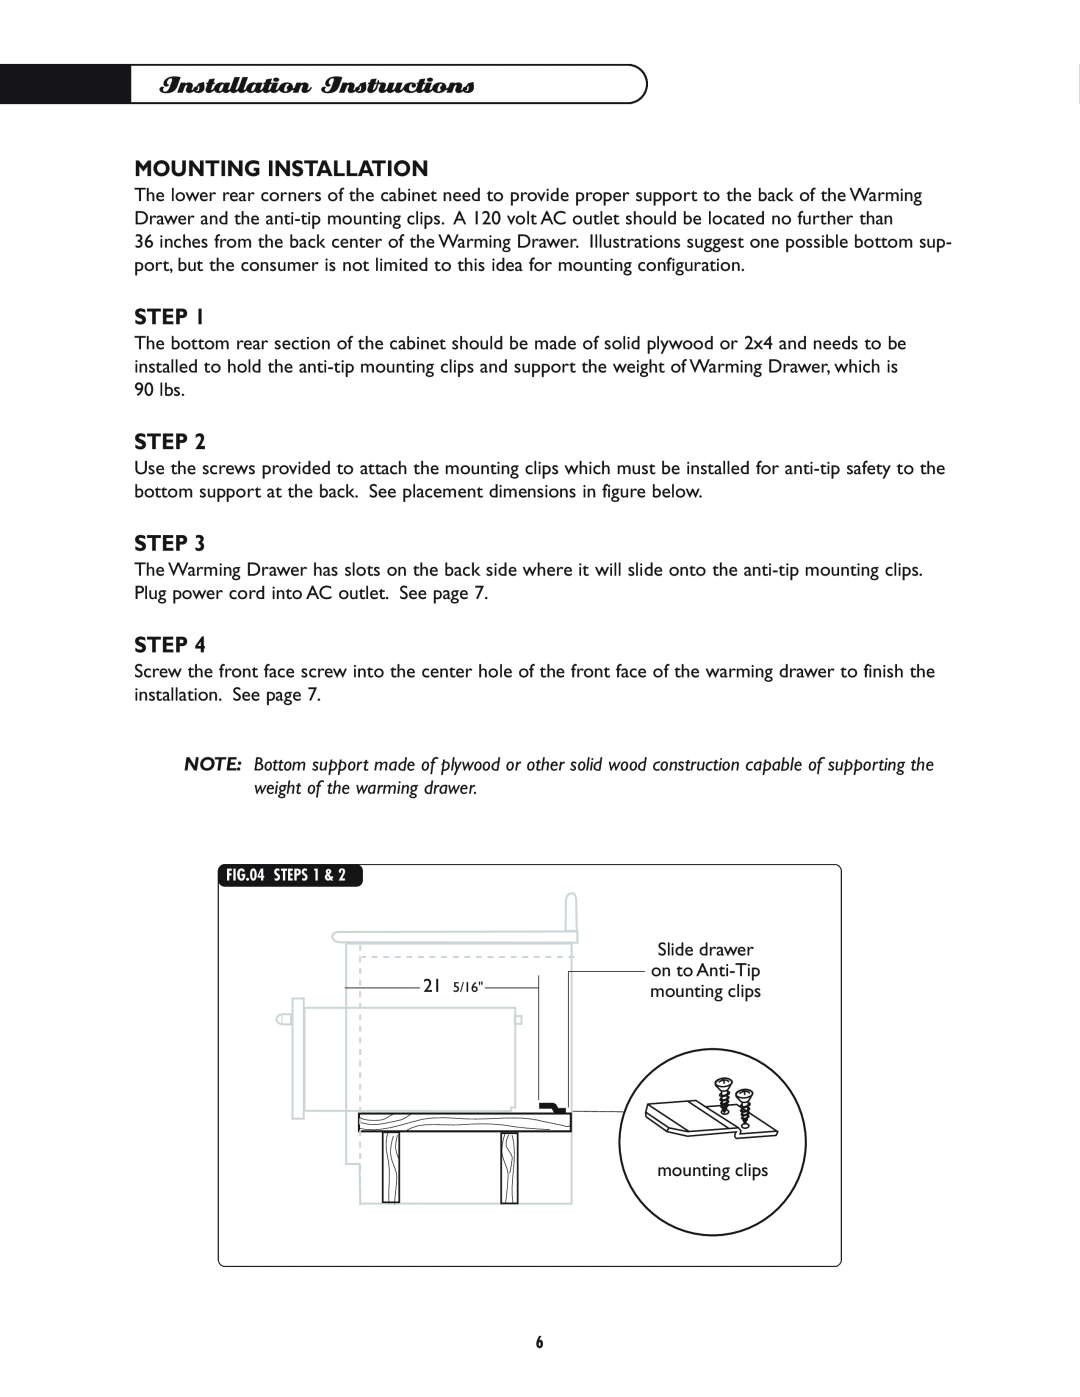 DCS WD-30-BL manual Mounting Installation, Step, Installation Instructions 